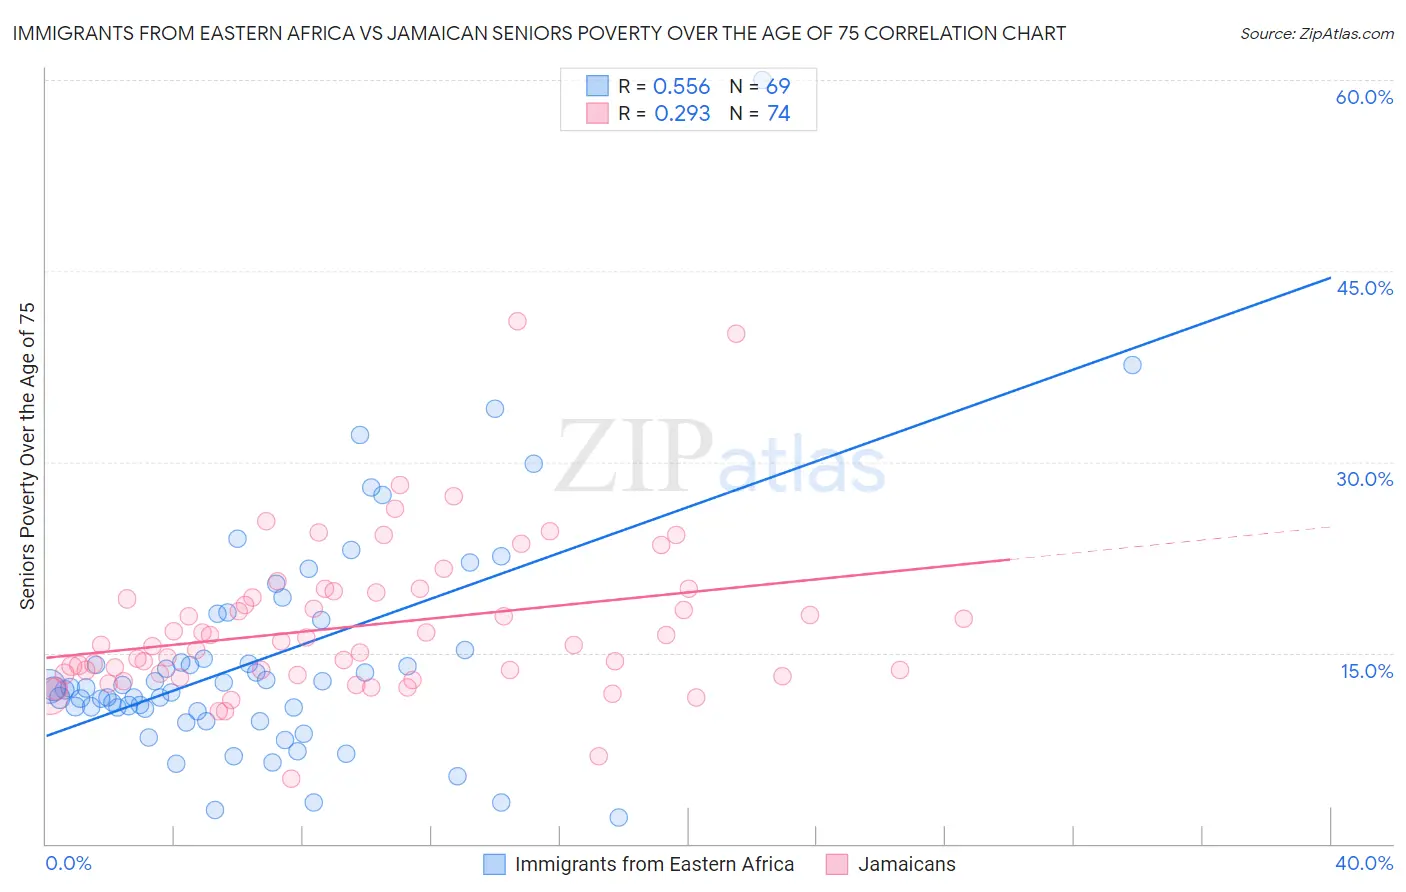 Immigrants from Eastern Africa vs Jamaican Seniors Poverty Over the Age of 75